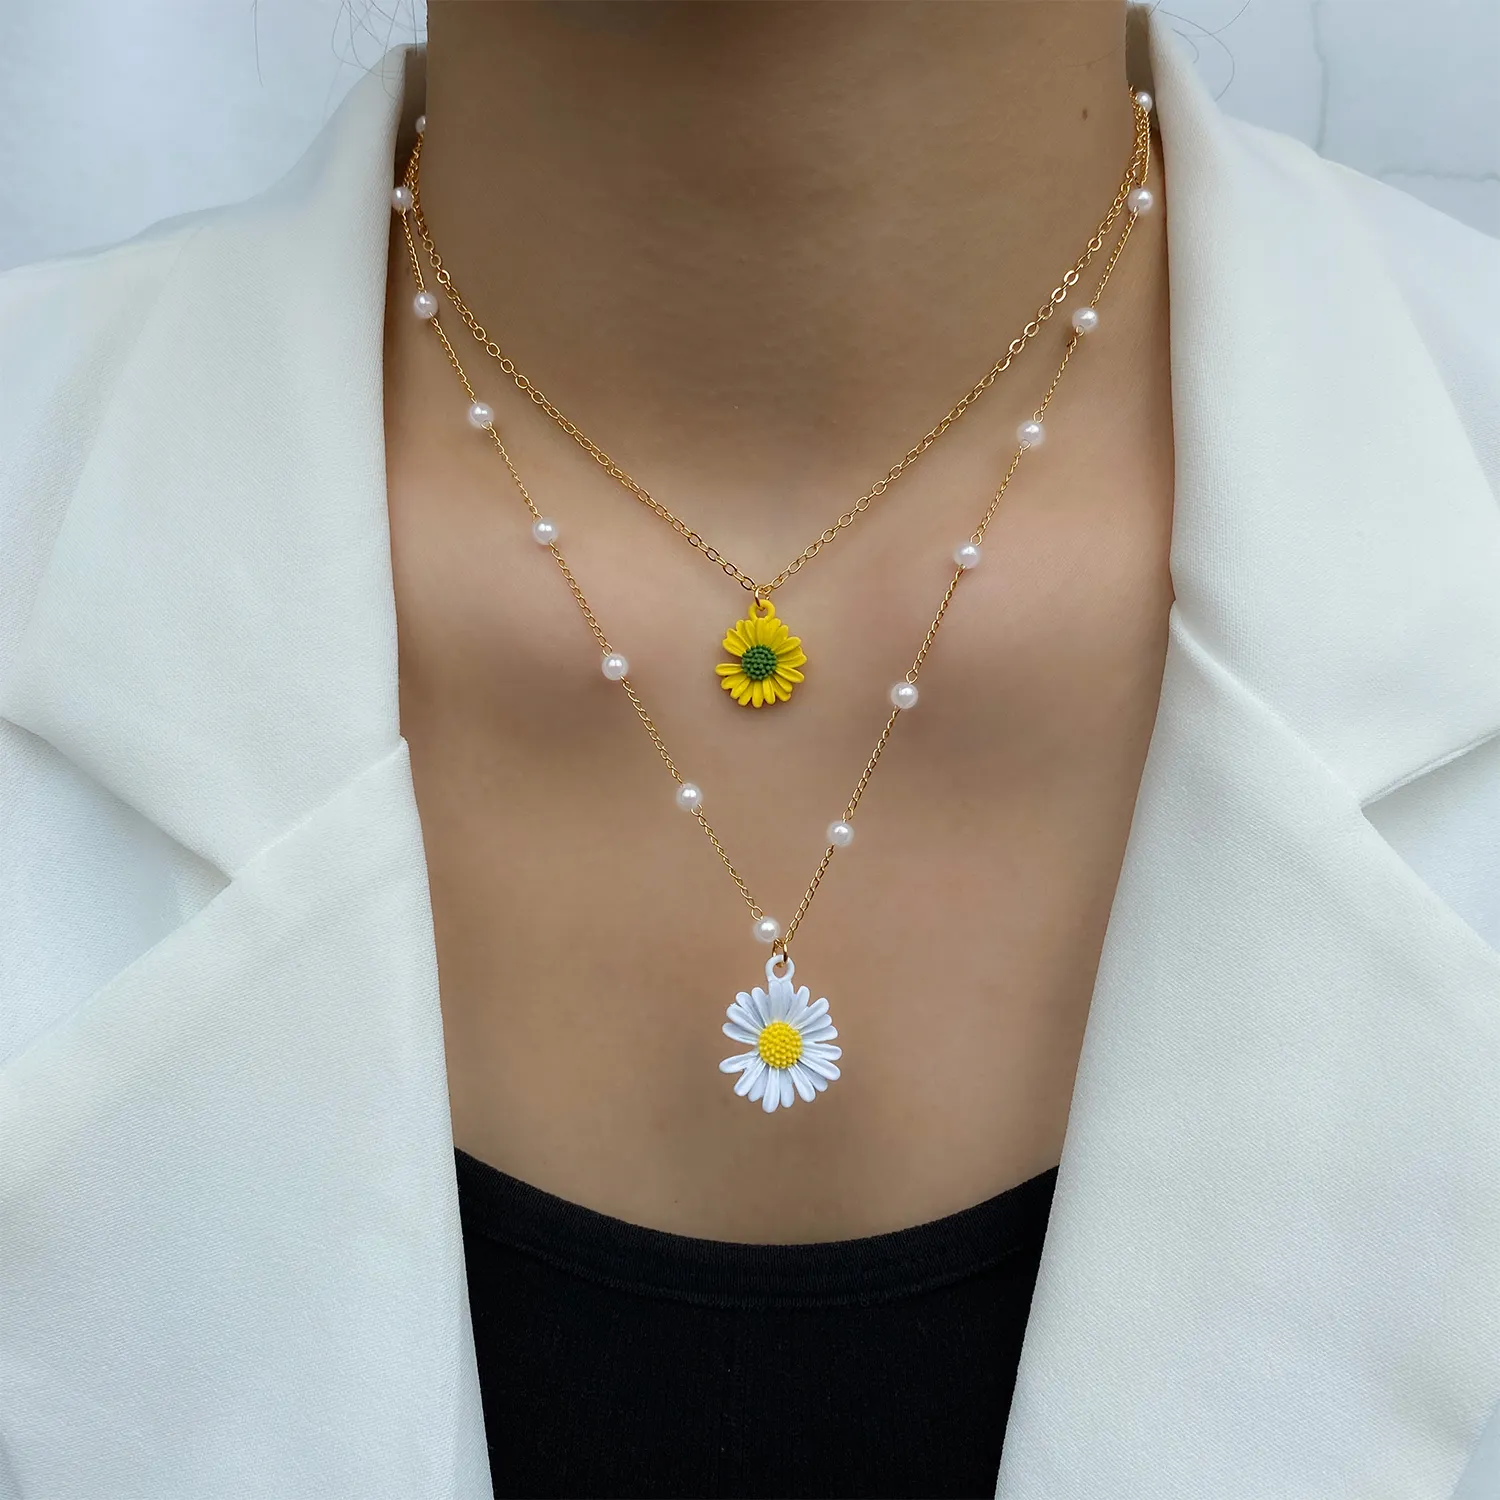 VKME Fashion Layered Pearl Flower Pendant Necklace Female Small Daisy Pearl Chain Collar Necklace Bohemian Vintage Jewelry Gift